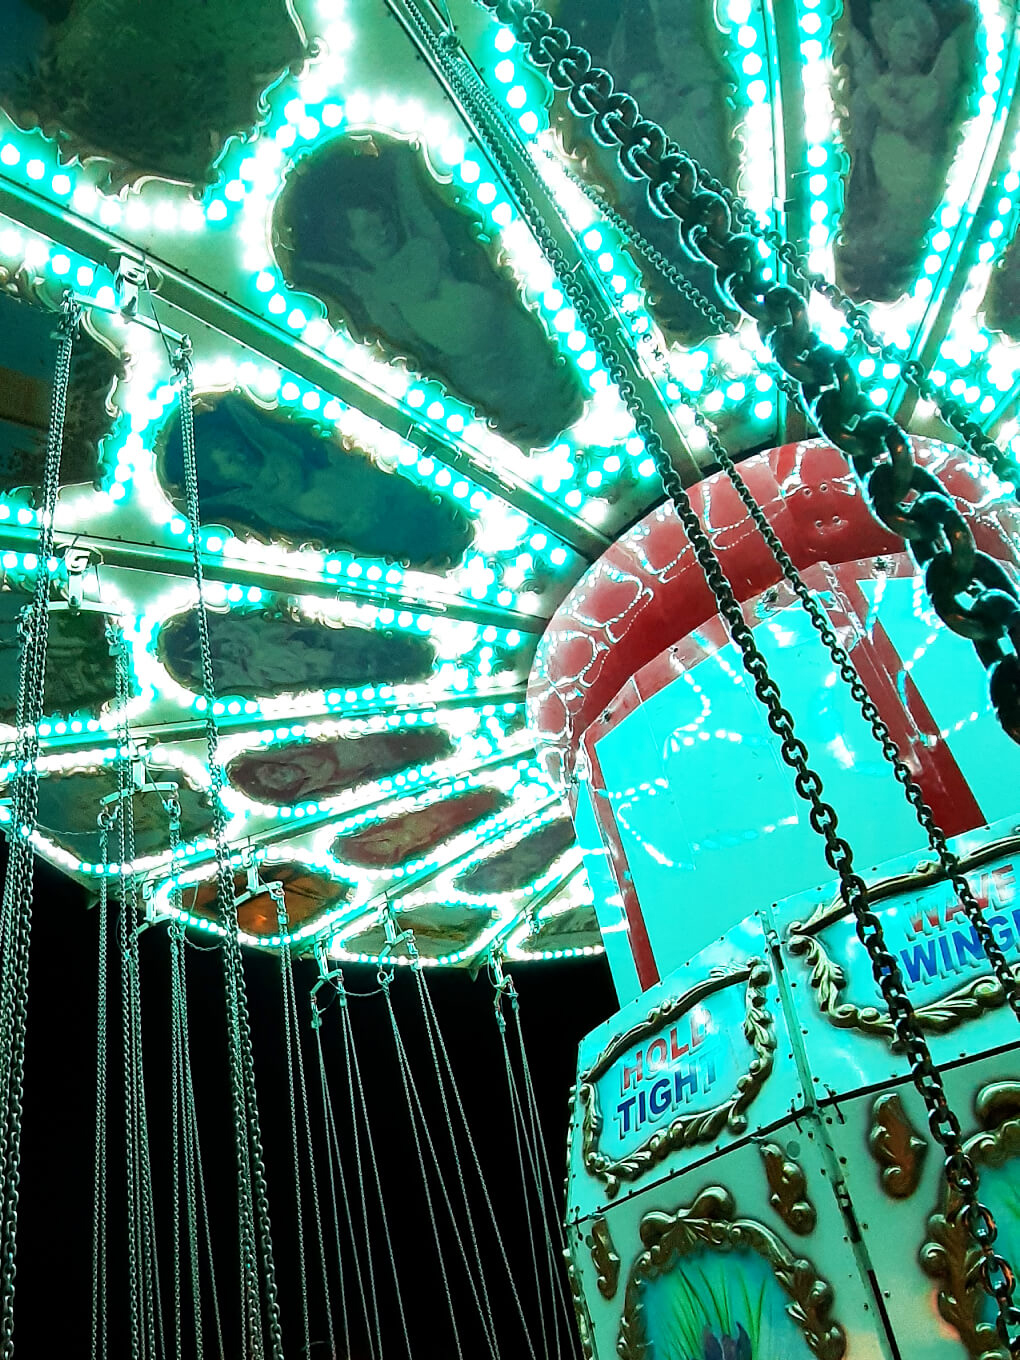 Bright lights in the canopy over a rotating swing ride, with chains to each seat hanging down into the picture